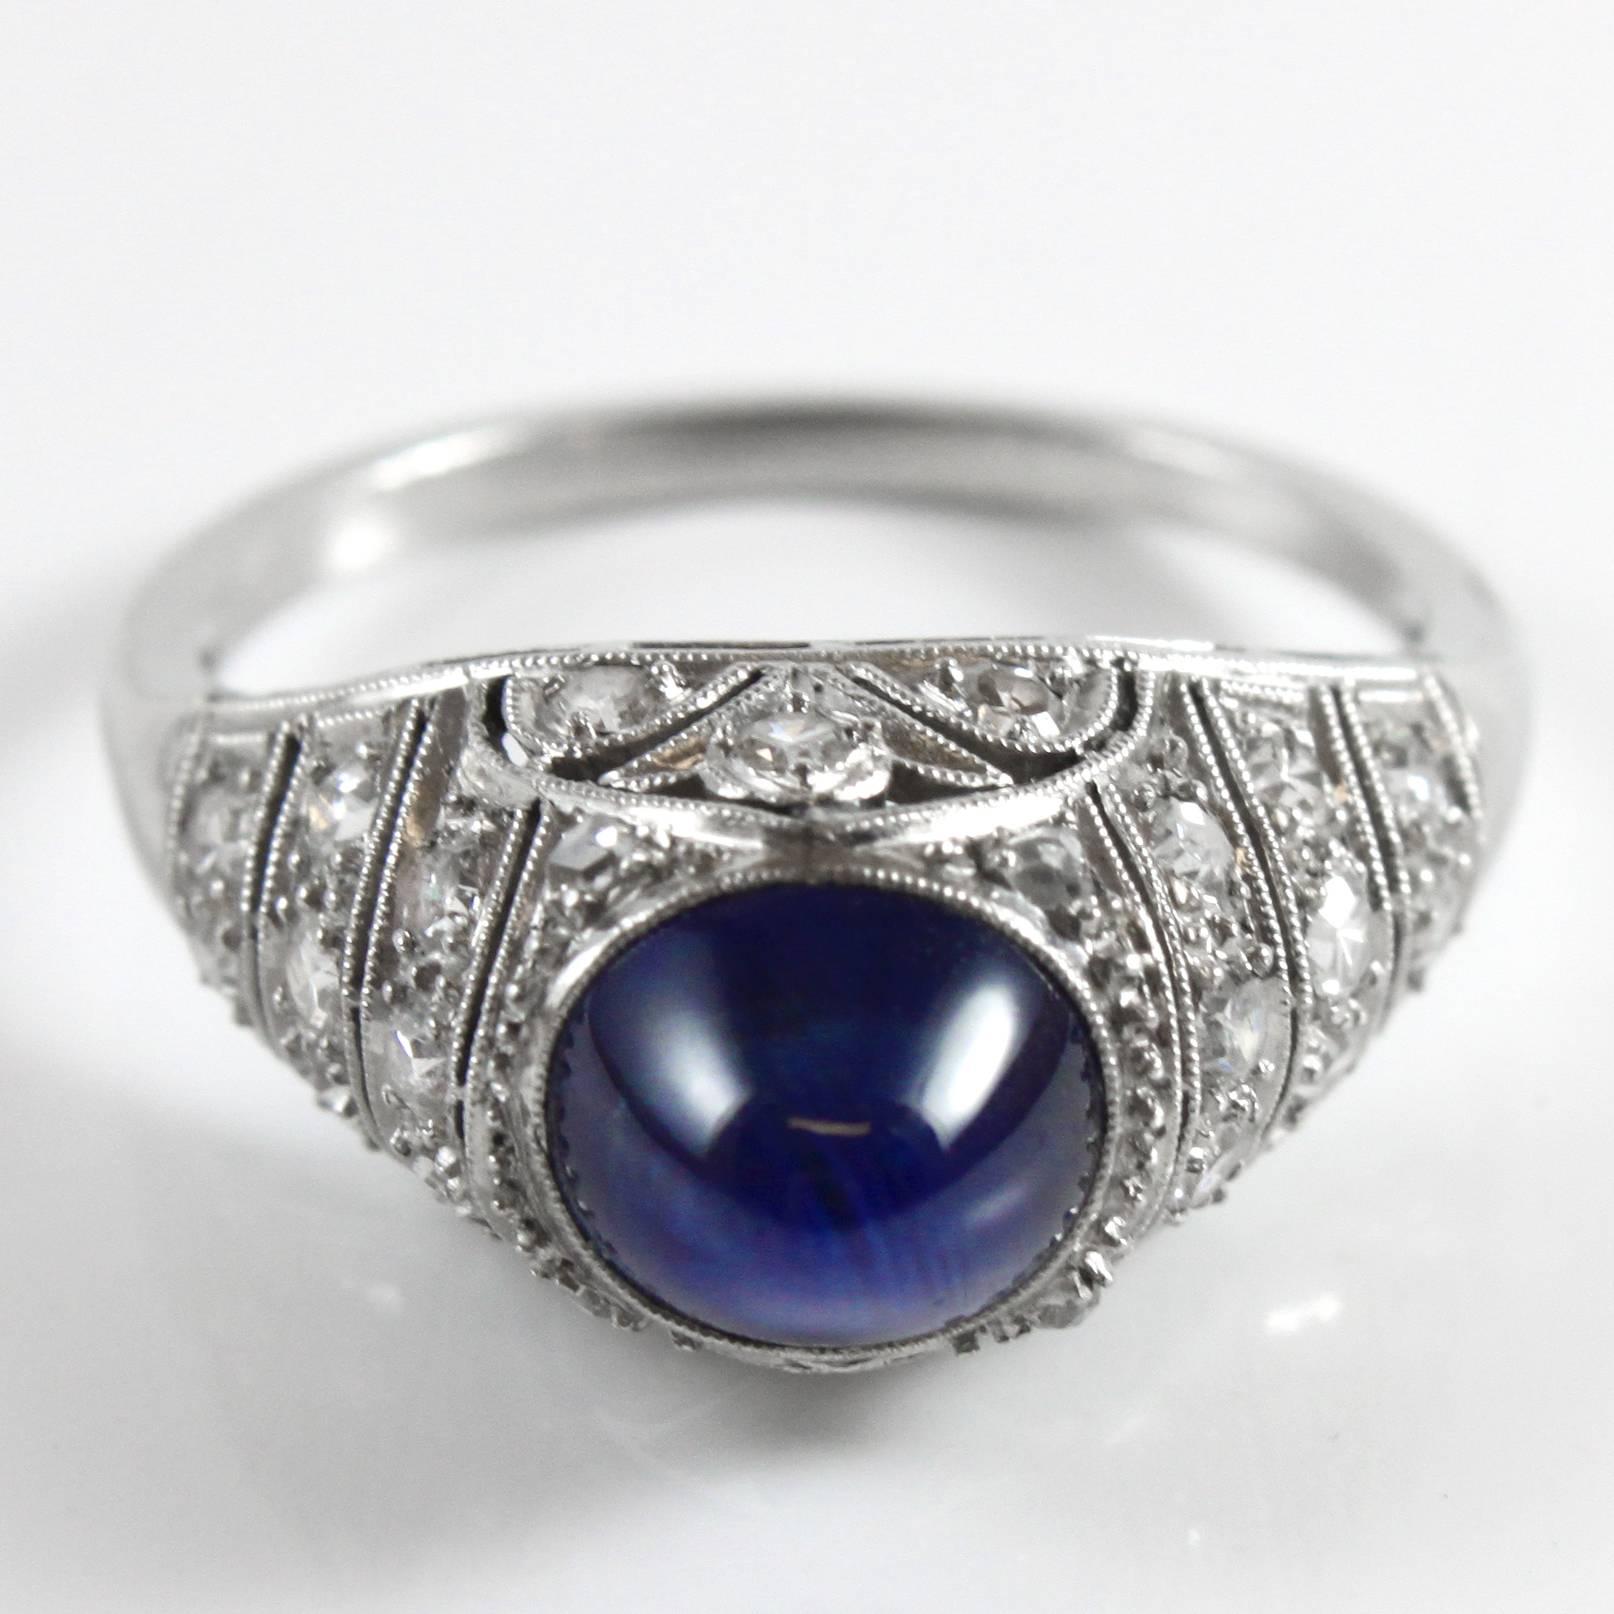 Sapphire cabochon and diamond ring in white gold. The sapphire weighs circa 3 carats and has a beautiful deep blue colour. It accentuates beautifully like a dome and surrounded by single cut diamonds.